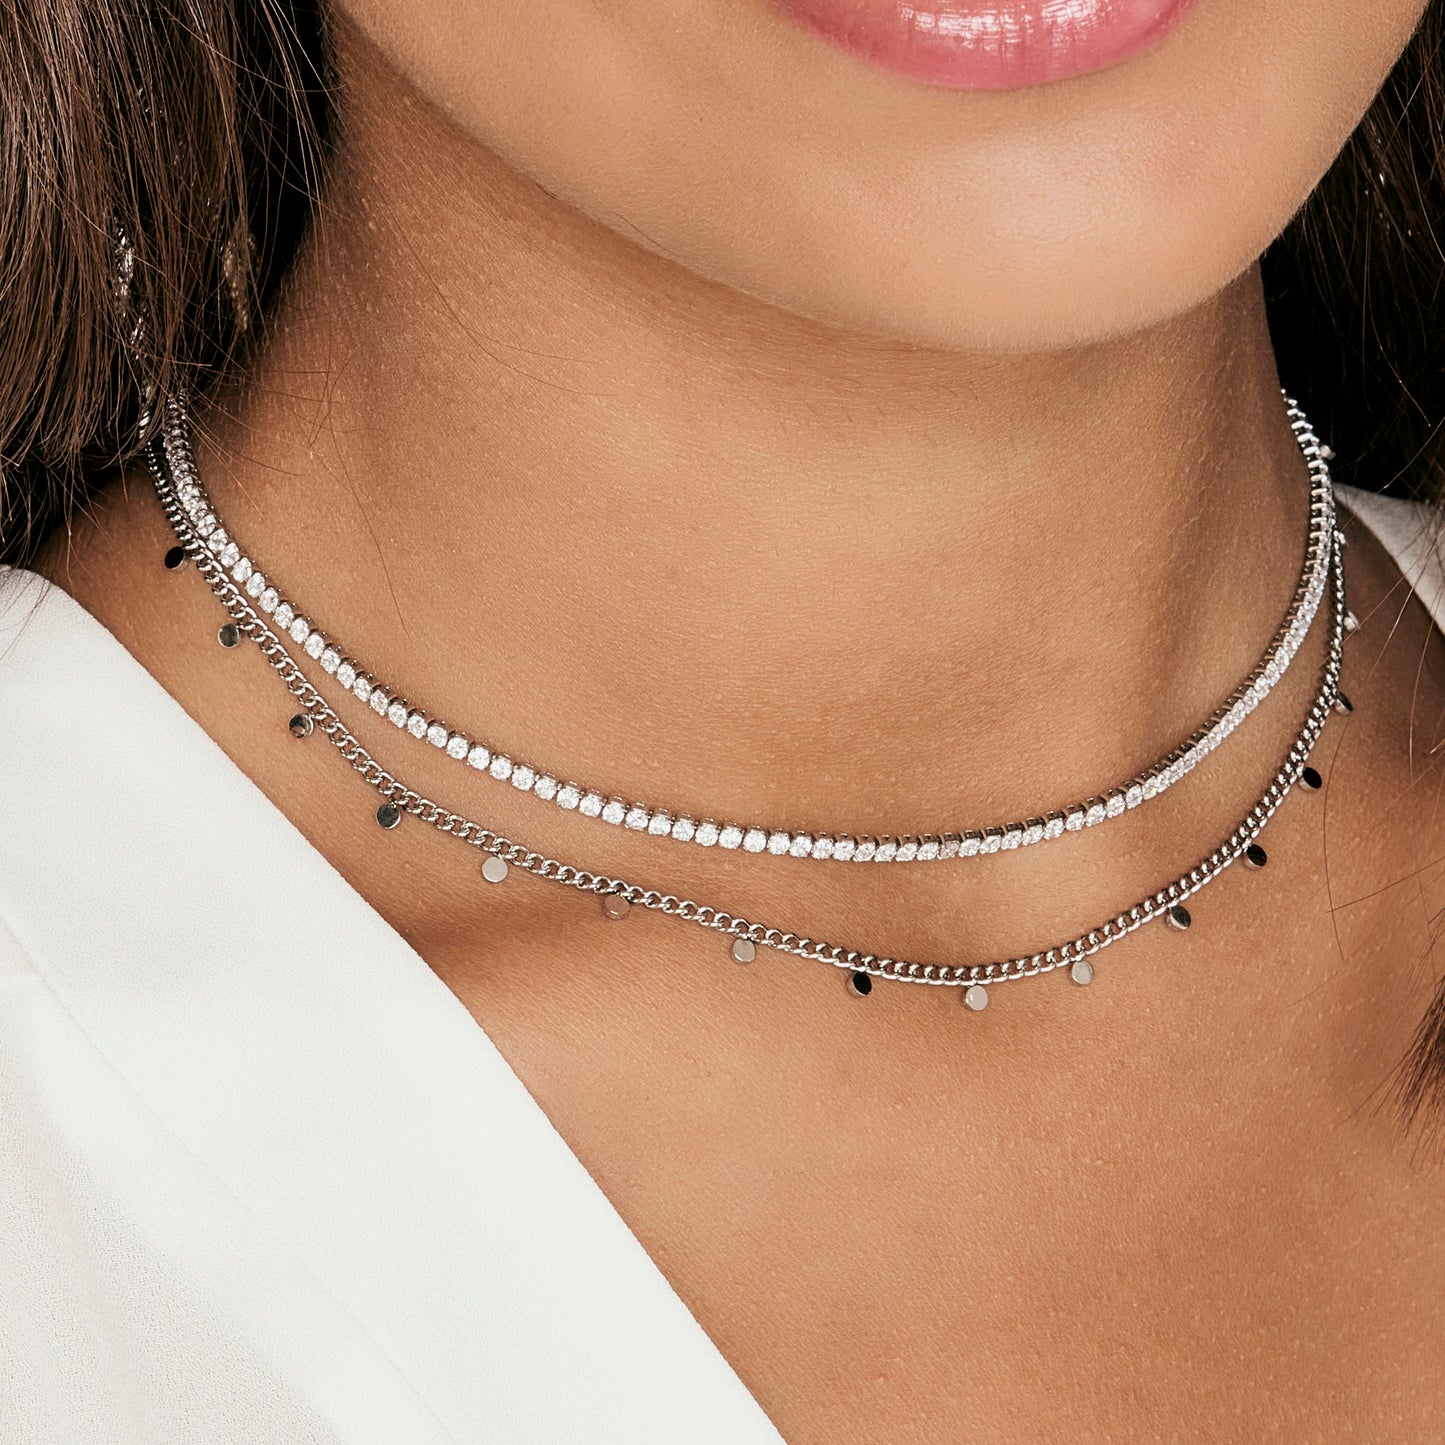 WOMEN'S STEEL NECKLACE WITH WHITE CRYSTALS